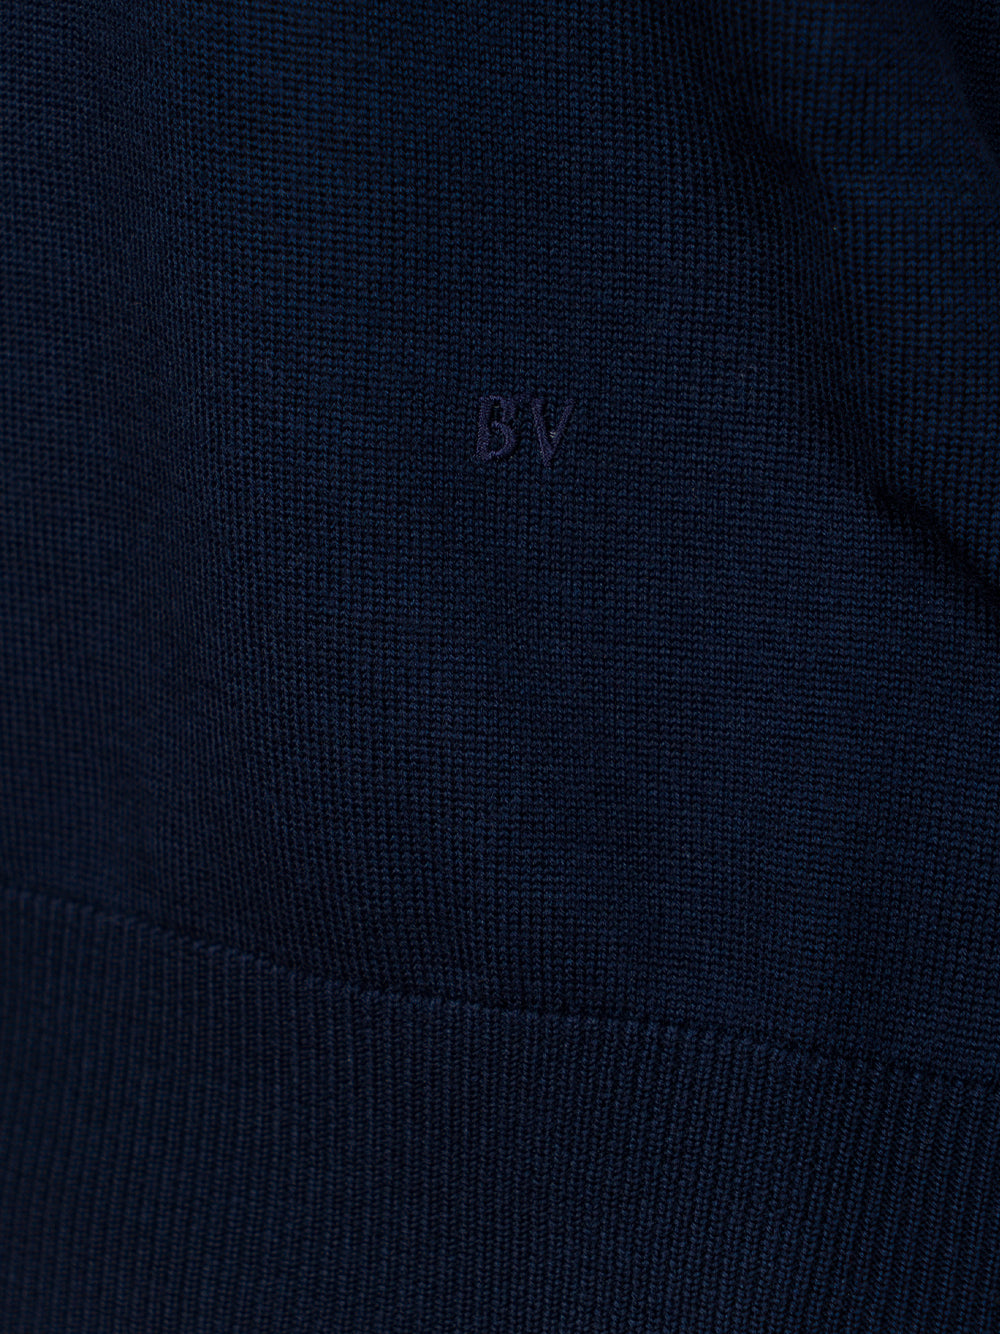 "Bv" Embroidery Wool Jumper